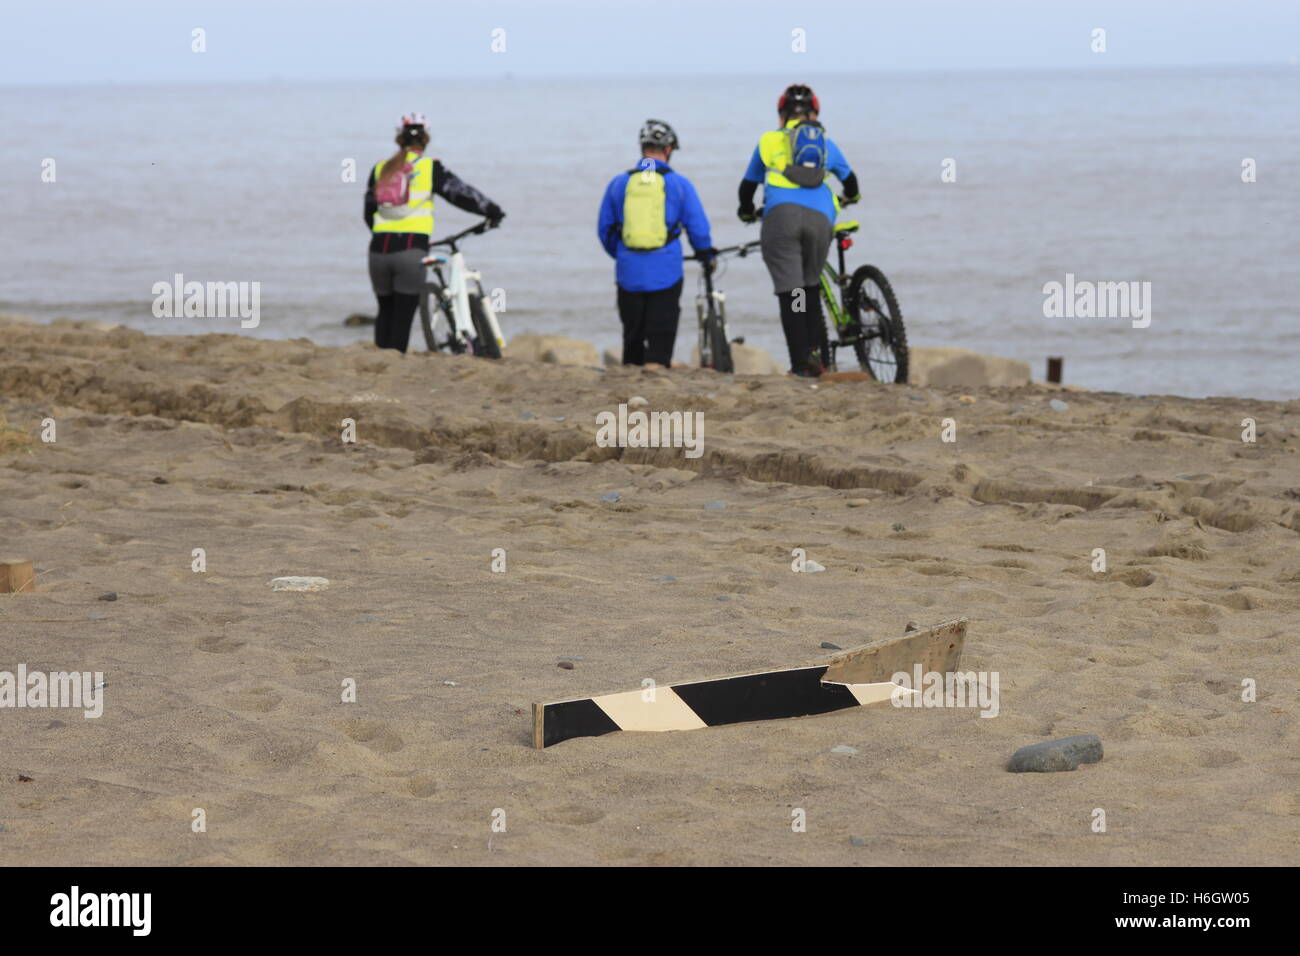 People riding bikes bicycles on beach sand coast at Spurn Point, East Yorkshire, England with road sign half buried in sand. Stock Photo